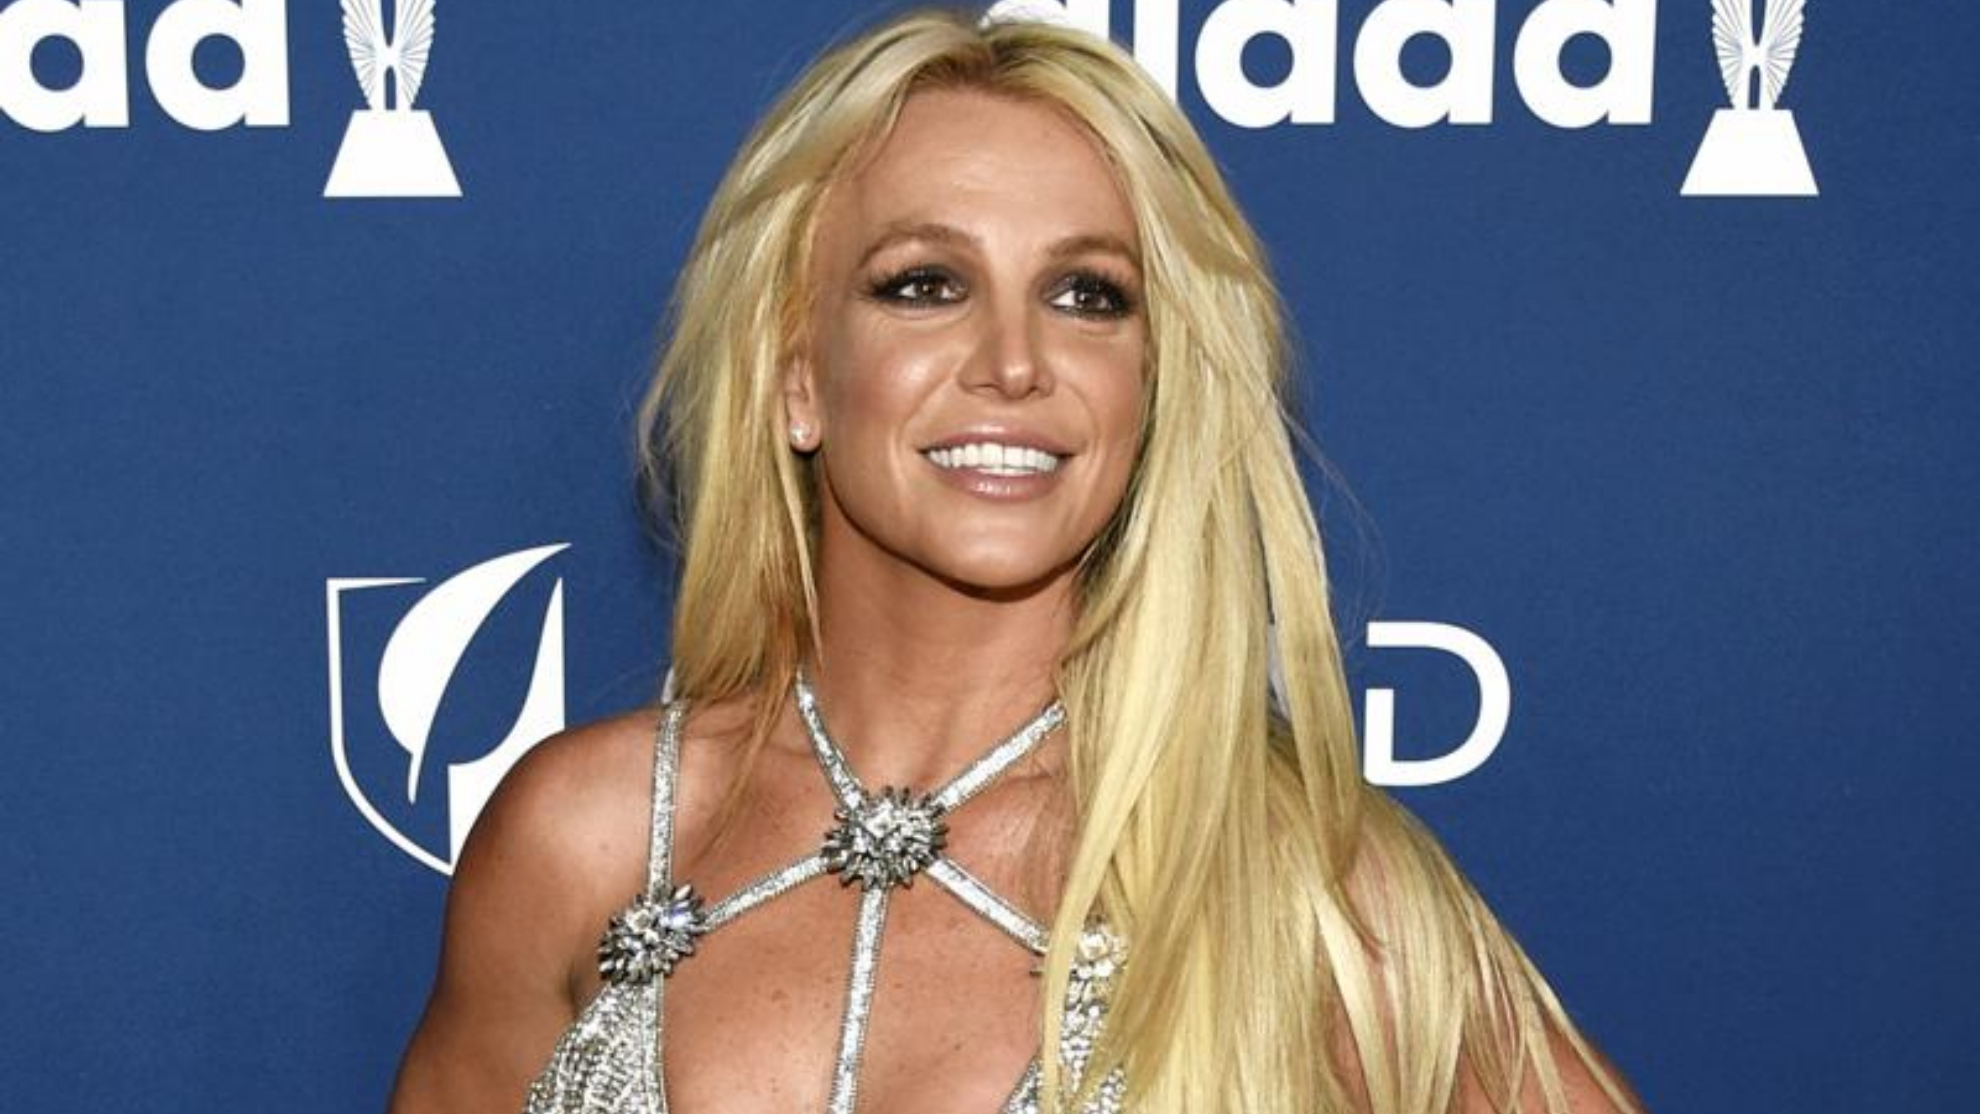 A book full of Britney Spears' memoirs is ready, but it seems like there's no paper to print it on